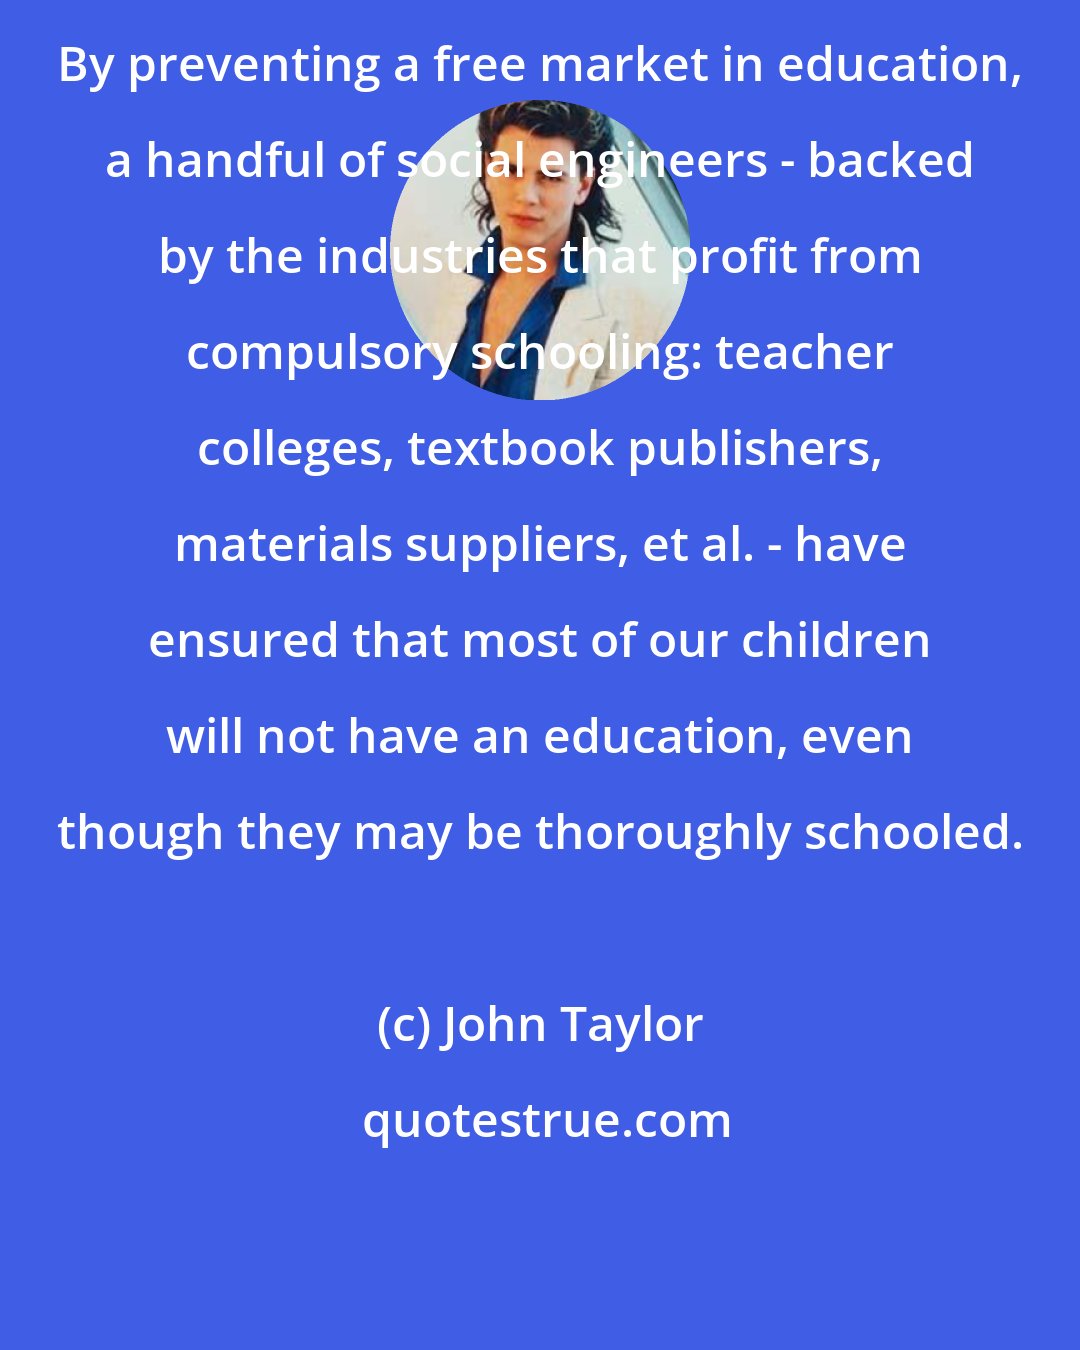 John Taylor: By preventing a free market in education, a handful of social engineers - backed by the industries that profit from compulsory schooling: teacher colleges, textbook publishers, materials suppliers, et al. - have ensured that most of our children will not have an education, even though they may be thoroughly schooled.